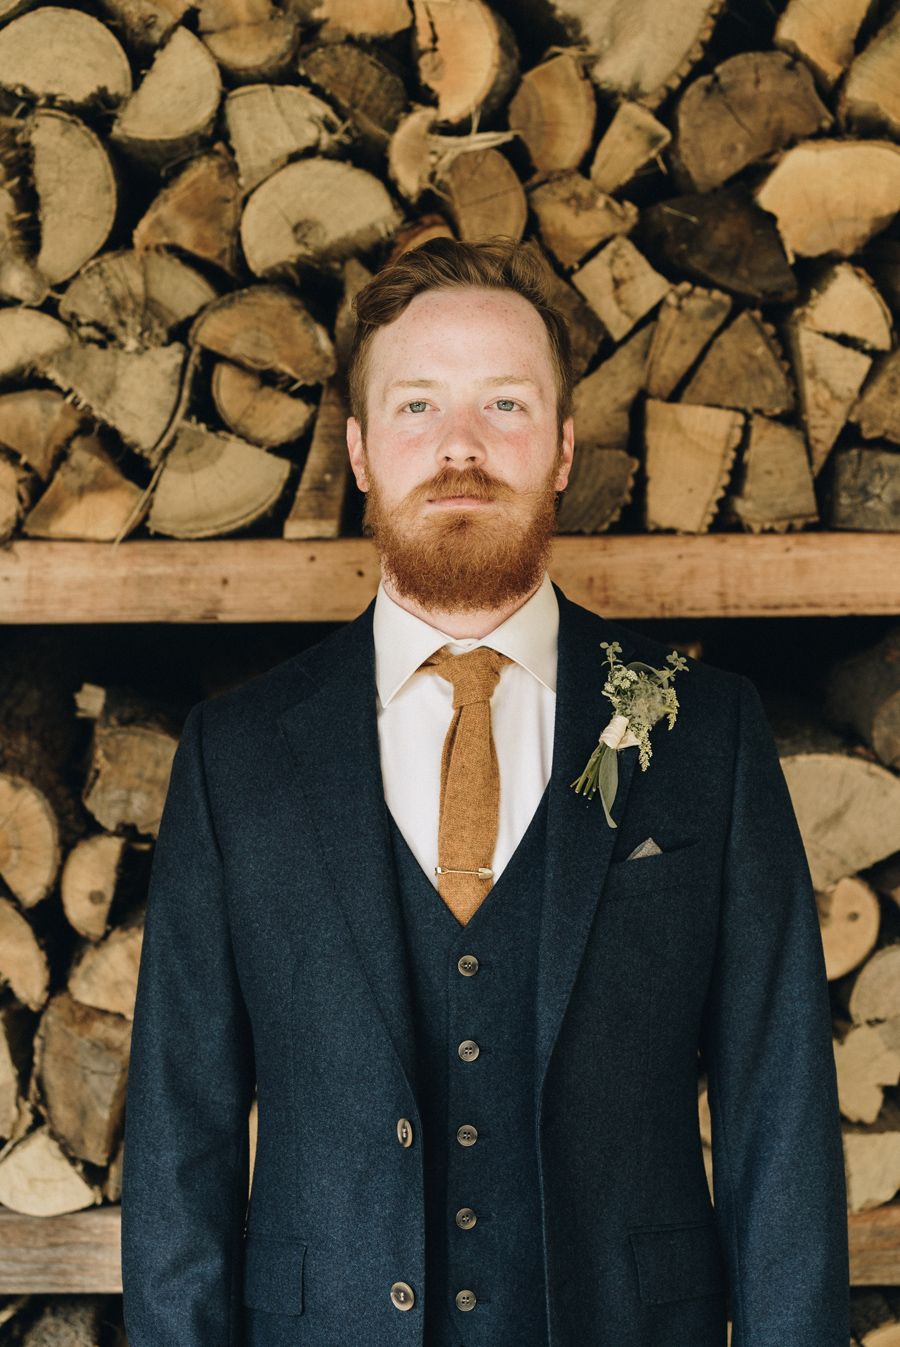 Charcoal Pick & Pick Suit - Oliver Wicks